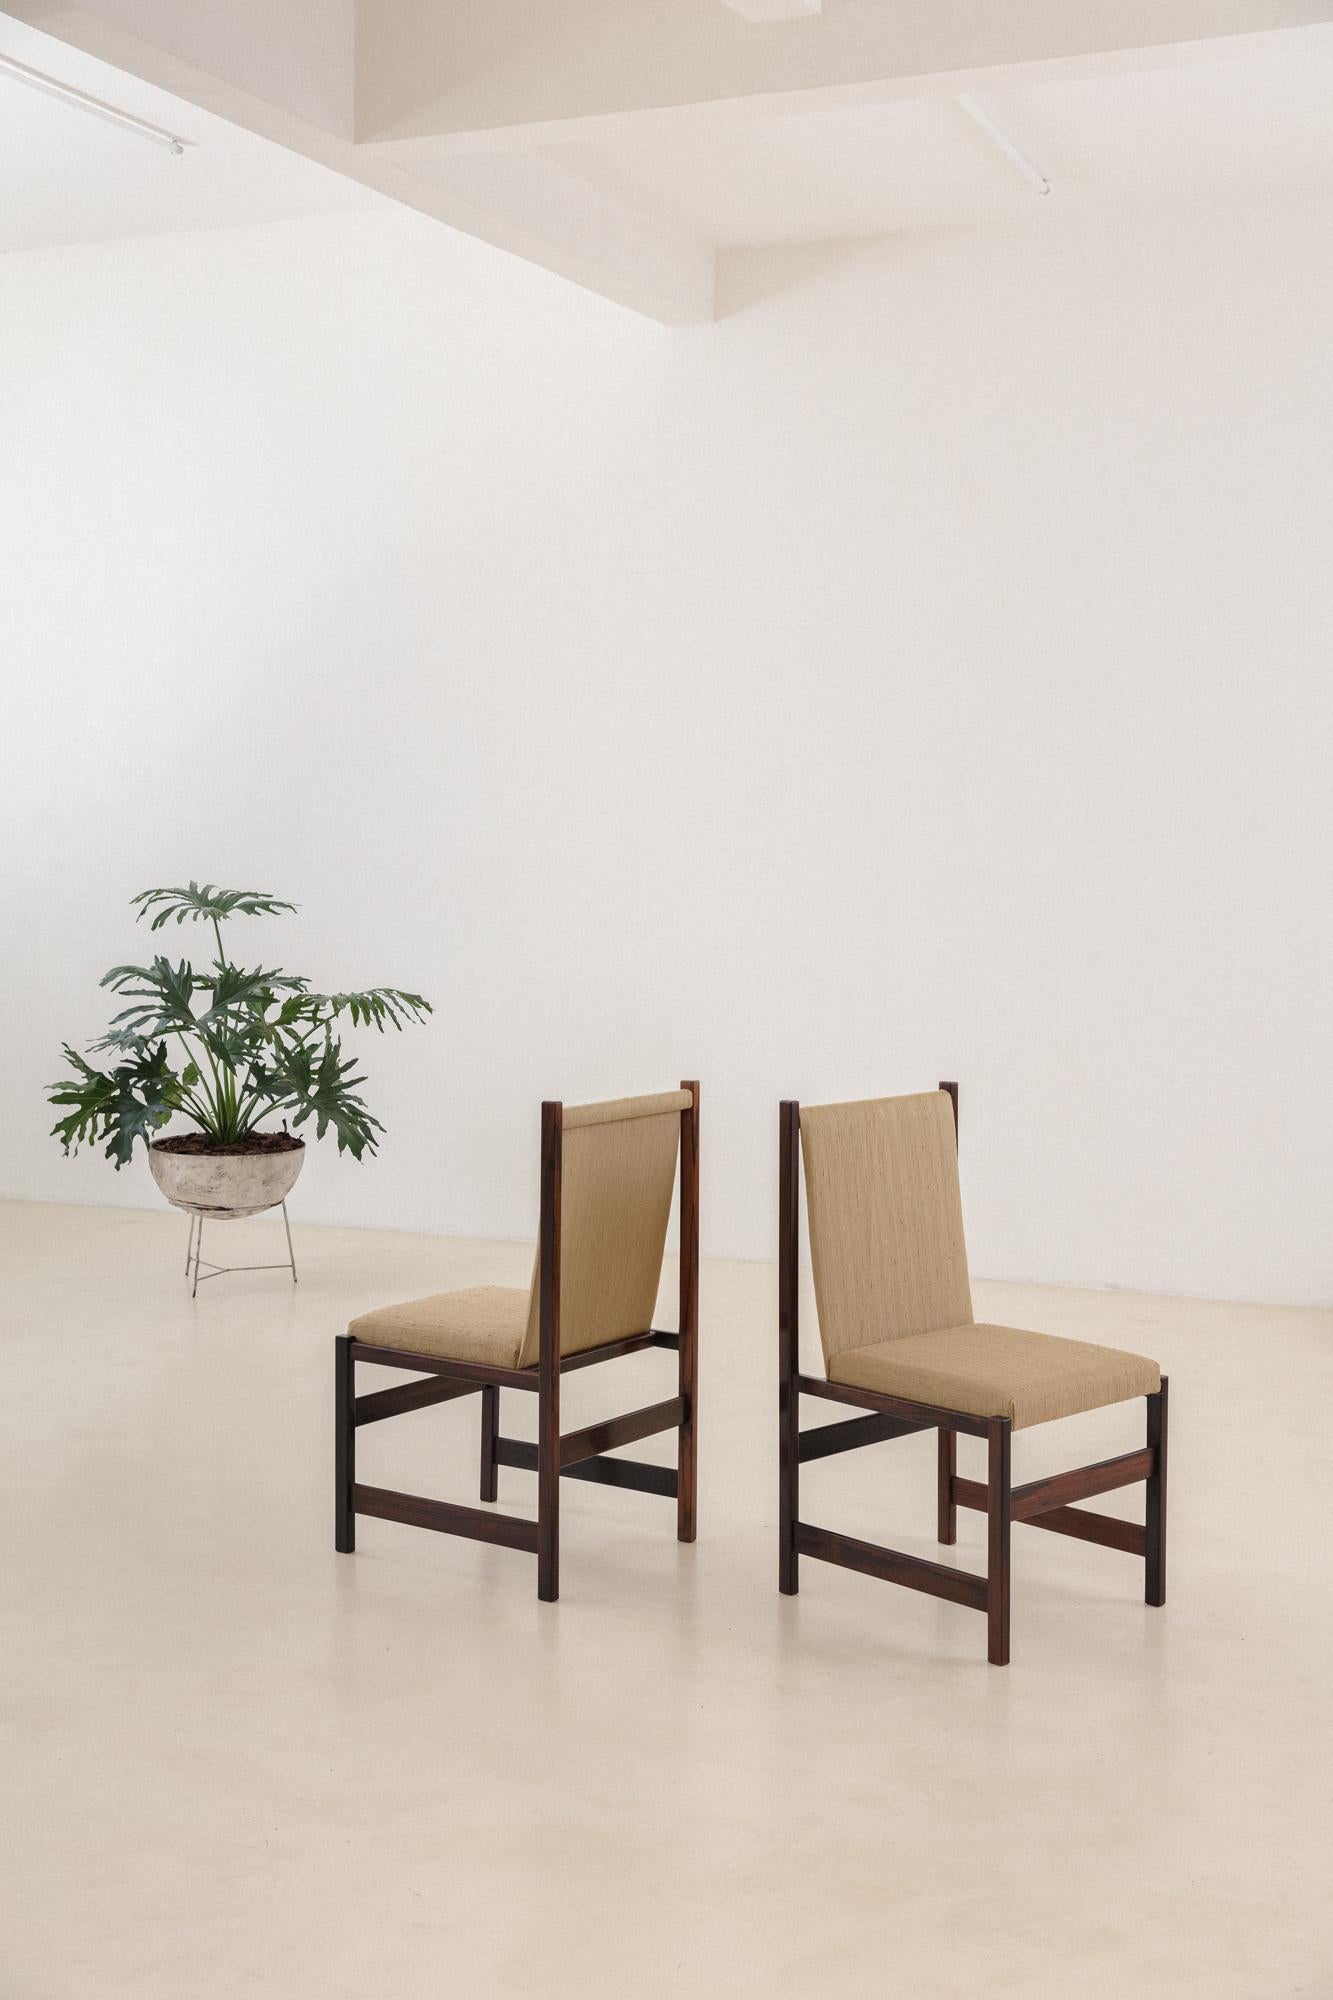 Mid-20th Century Set of 10 Rosewood Dining Chairs, Celina Decorações, Brazilian Midcentury, 1960s For Sale